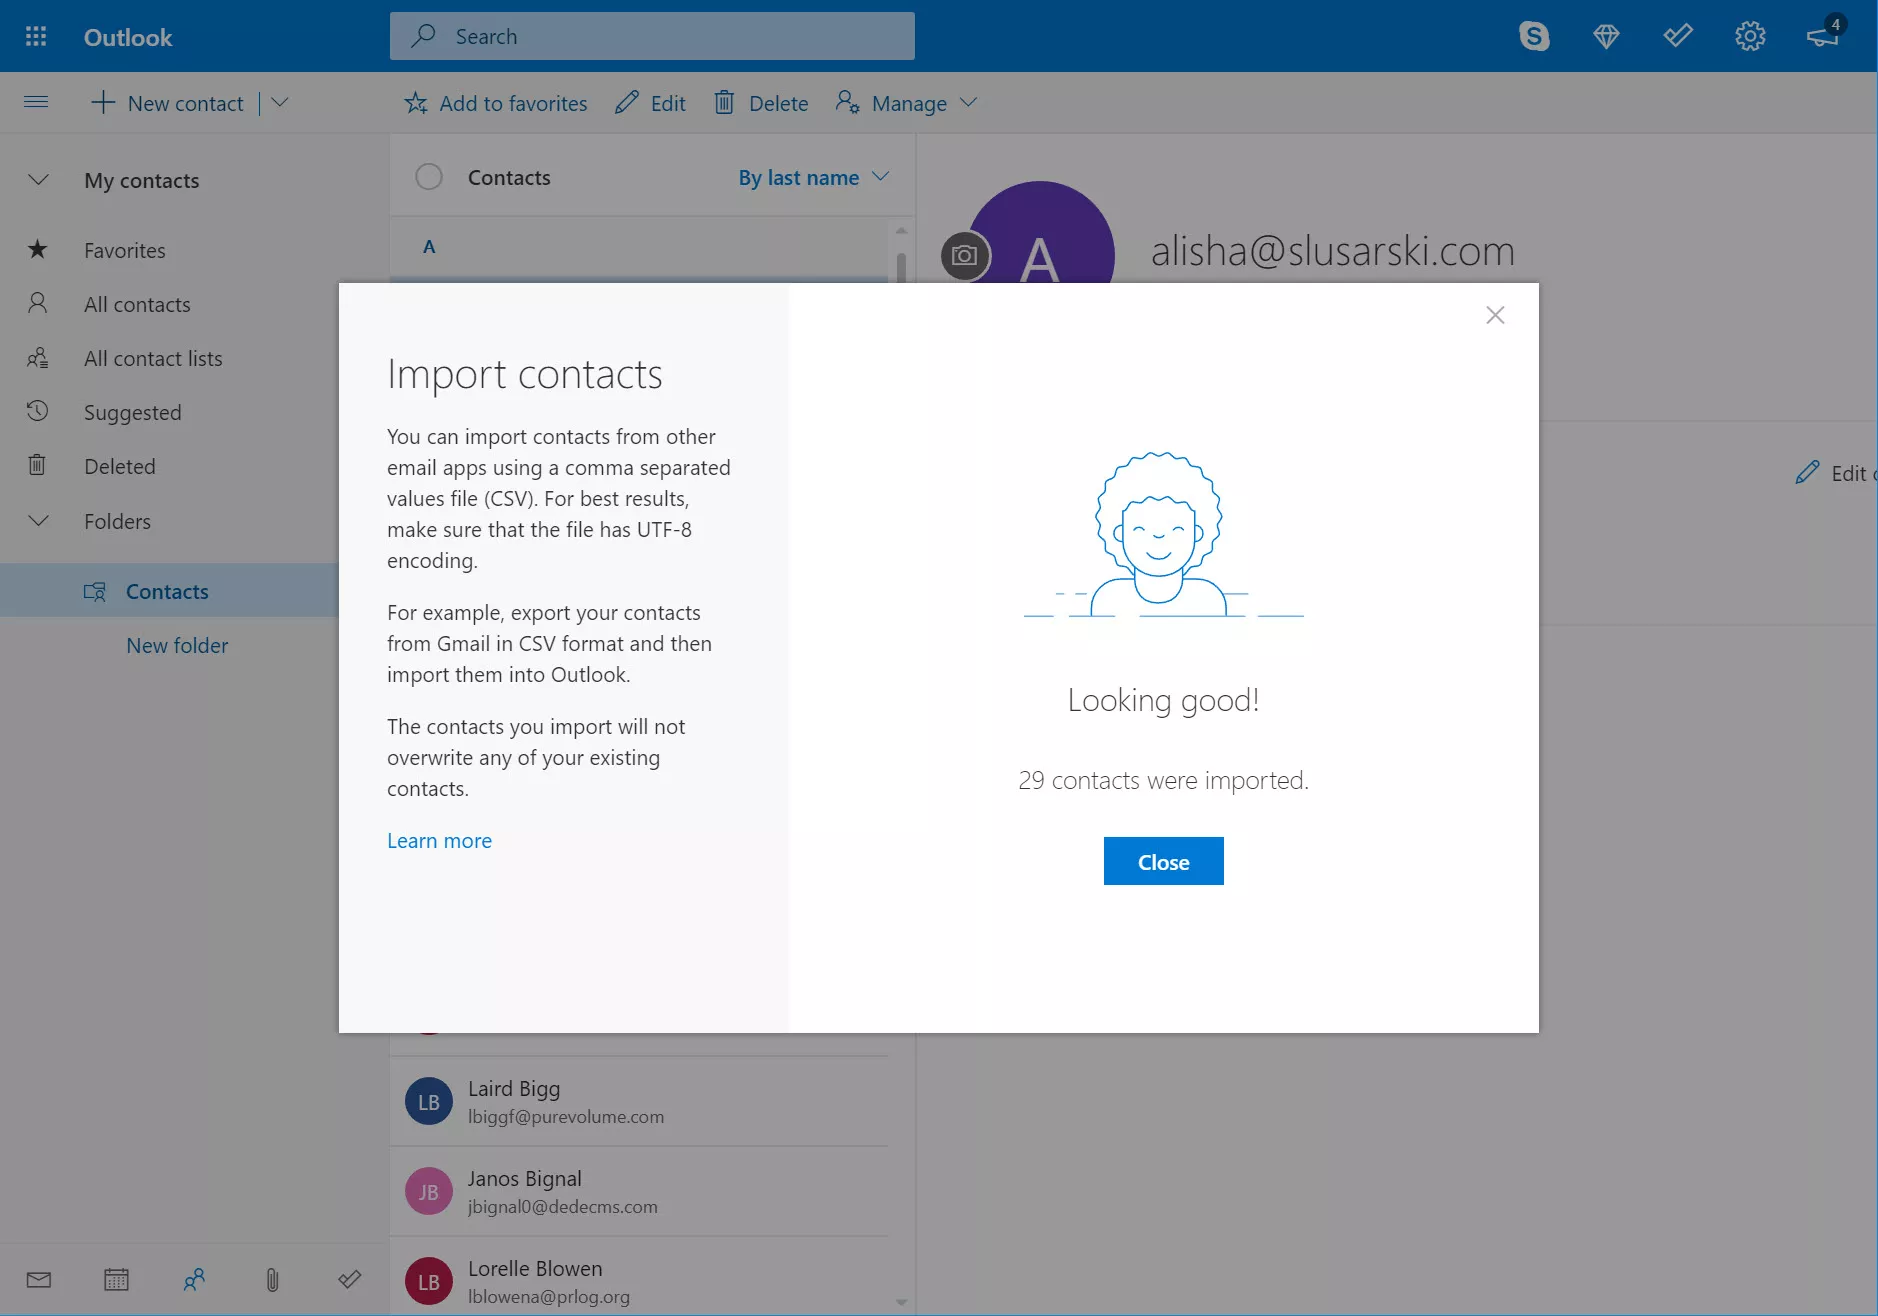 Import contacts complete screen in Outlook.com